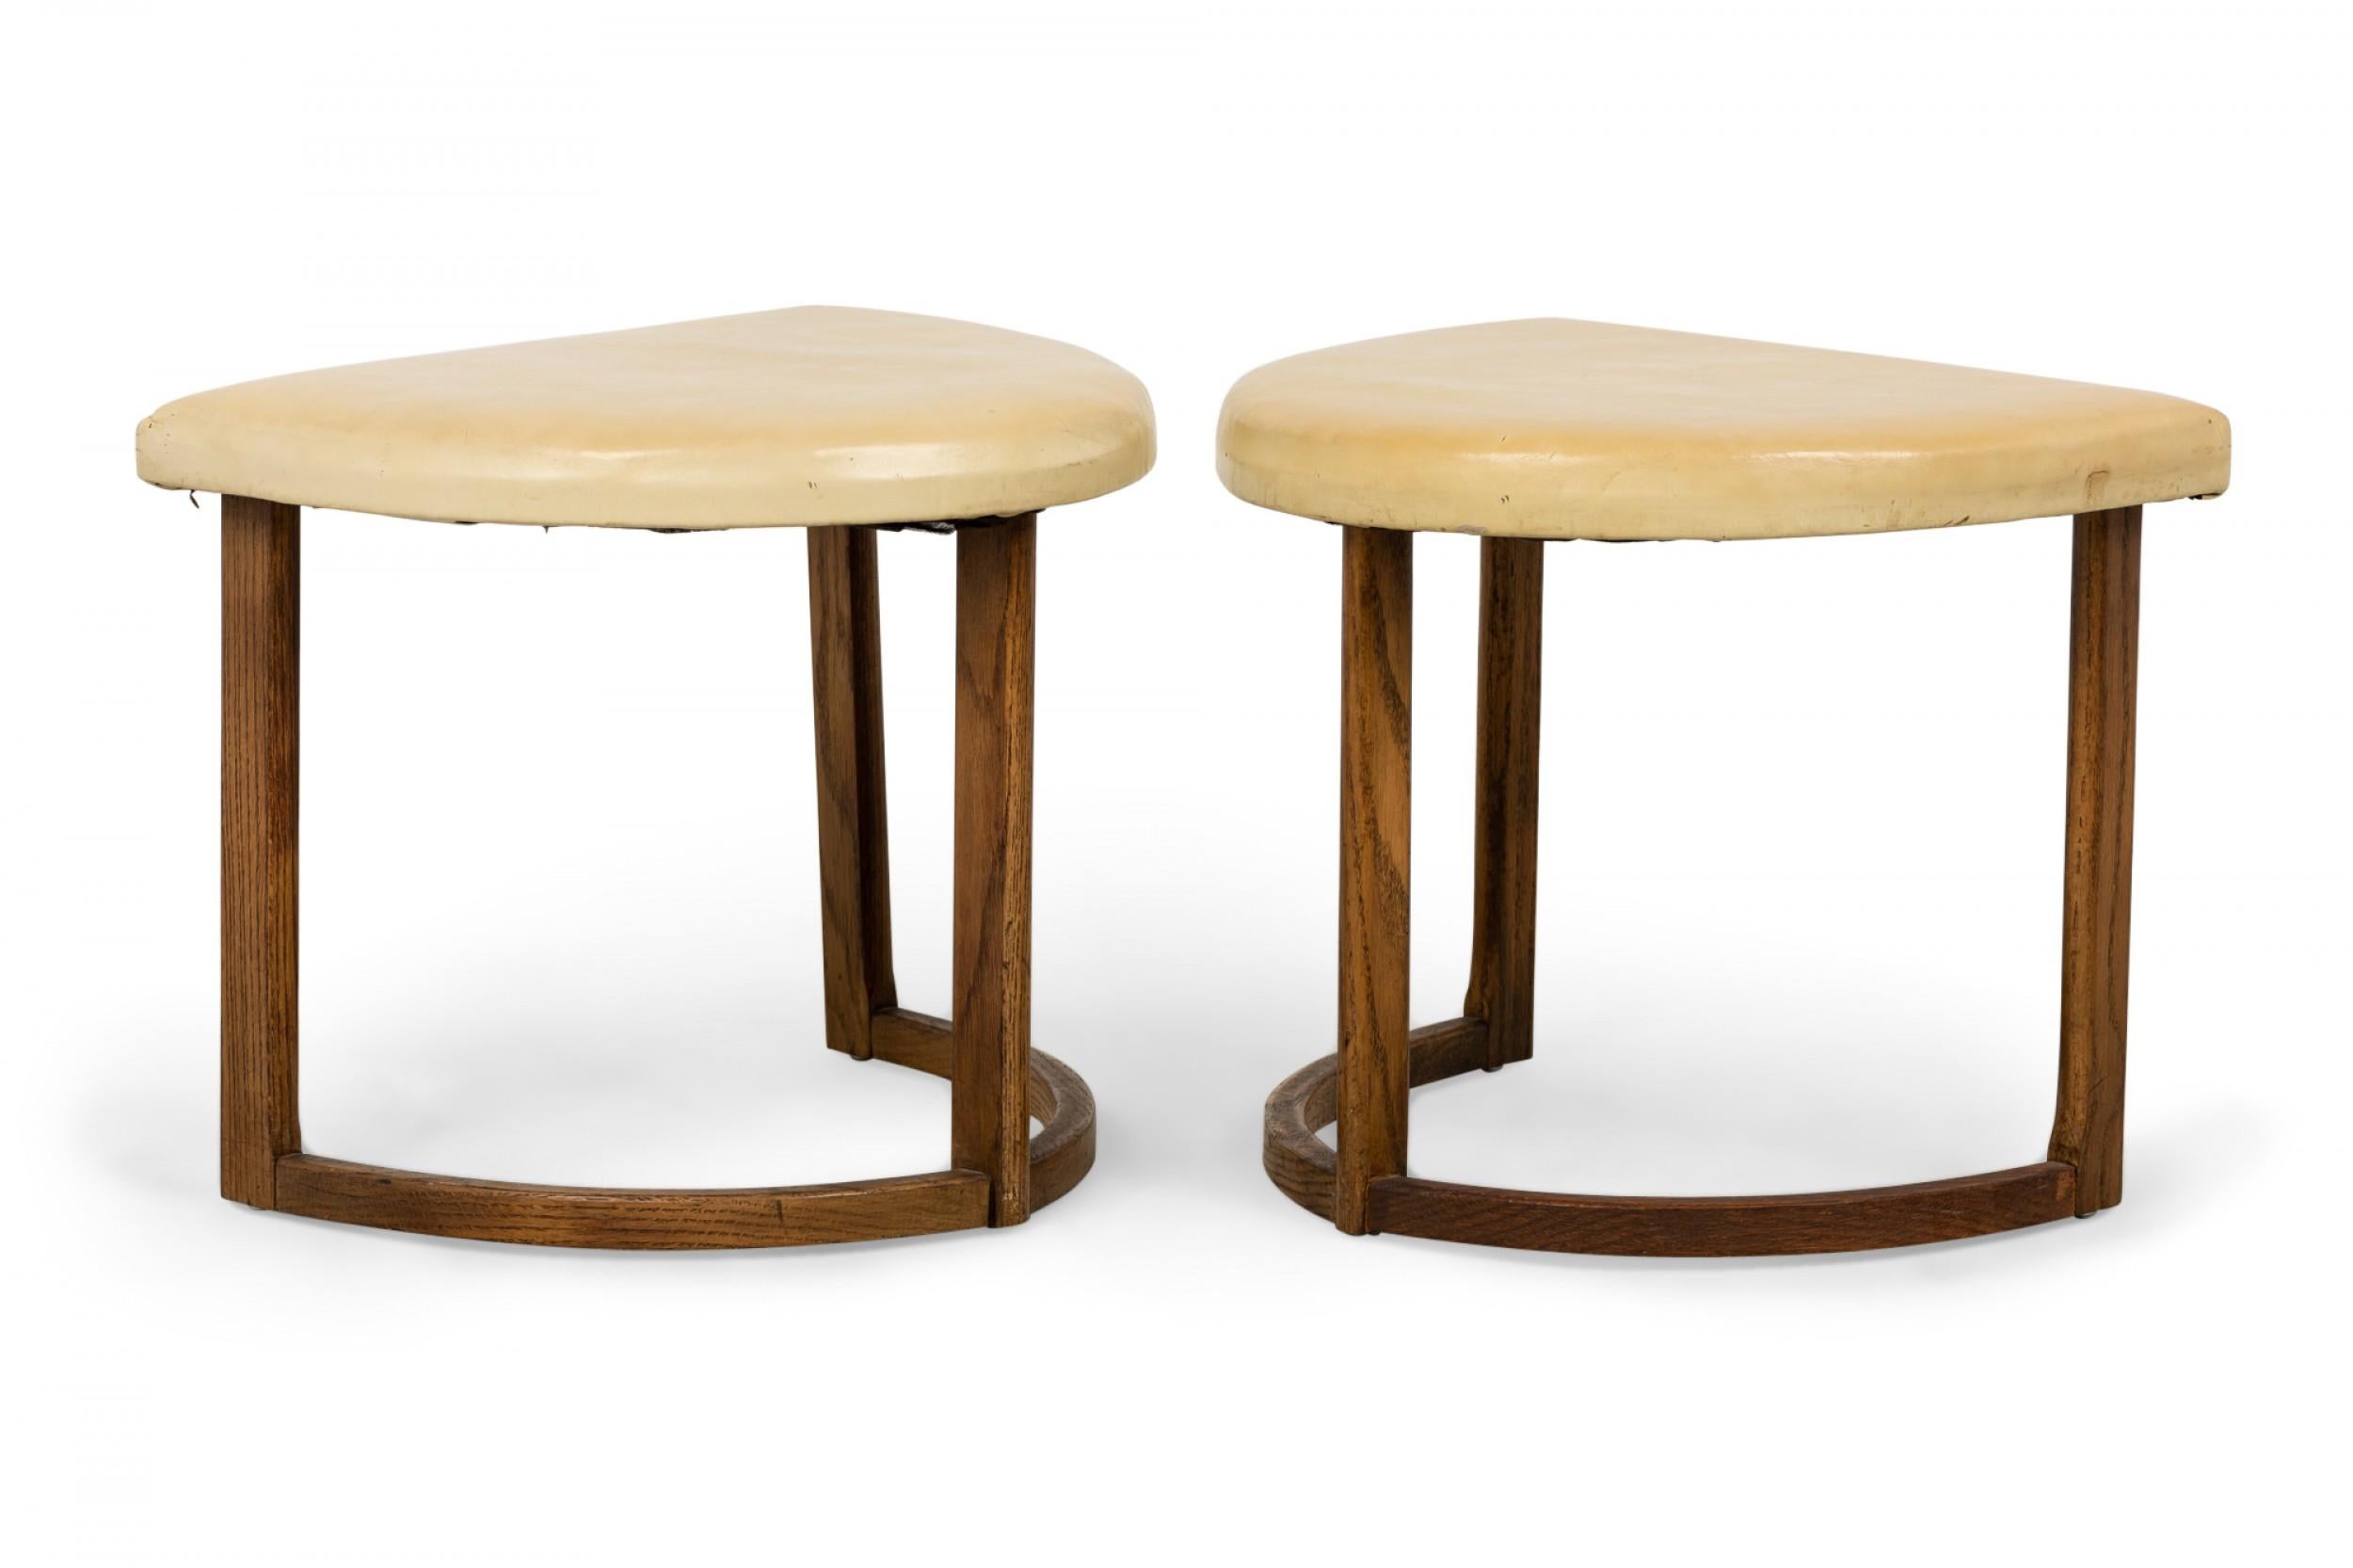 20th Century Pair of Half Moon Beige Leather and Walnut Footstools For Sale